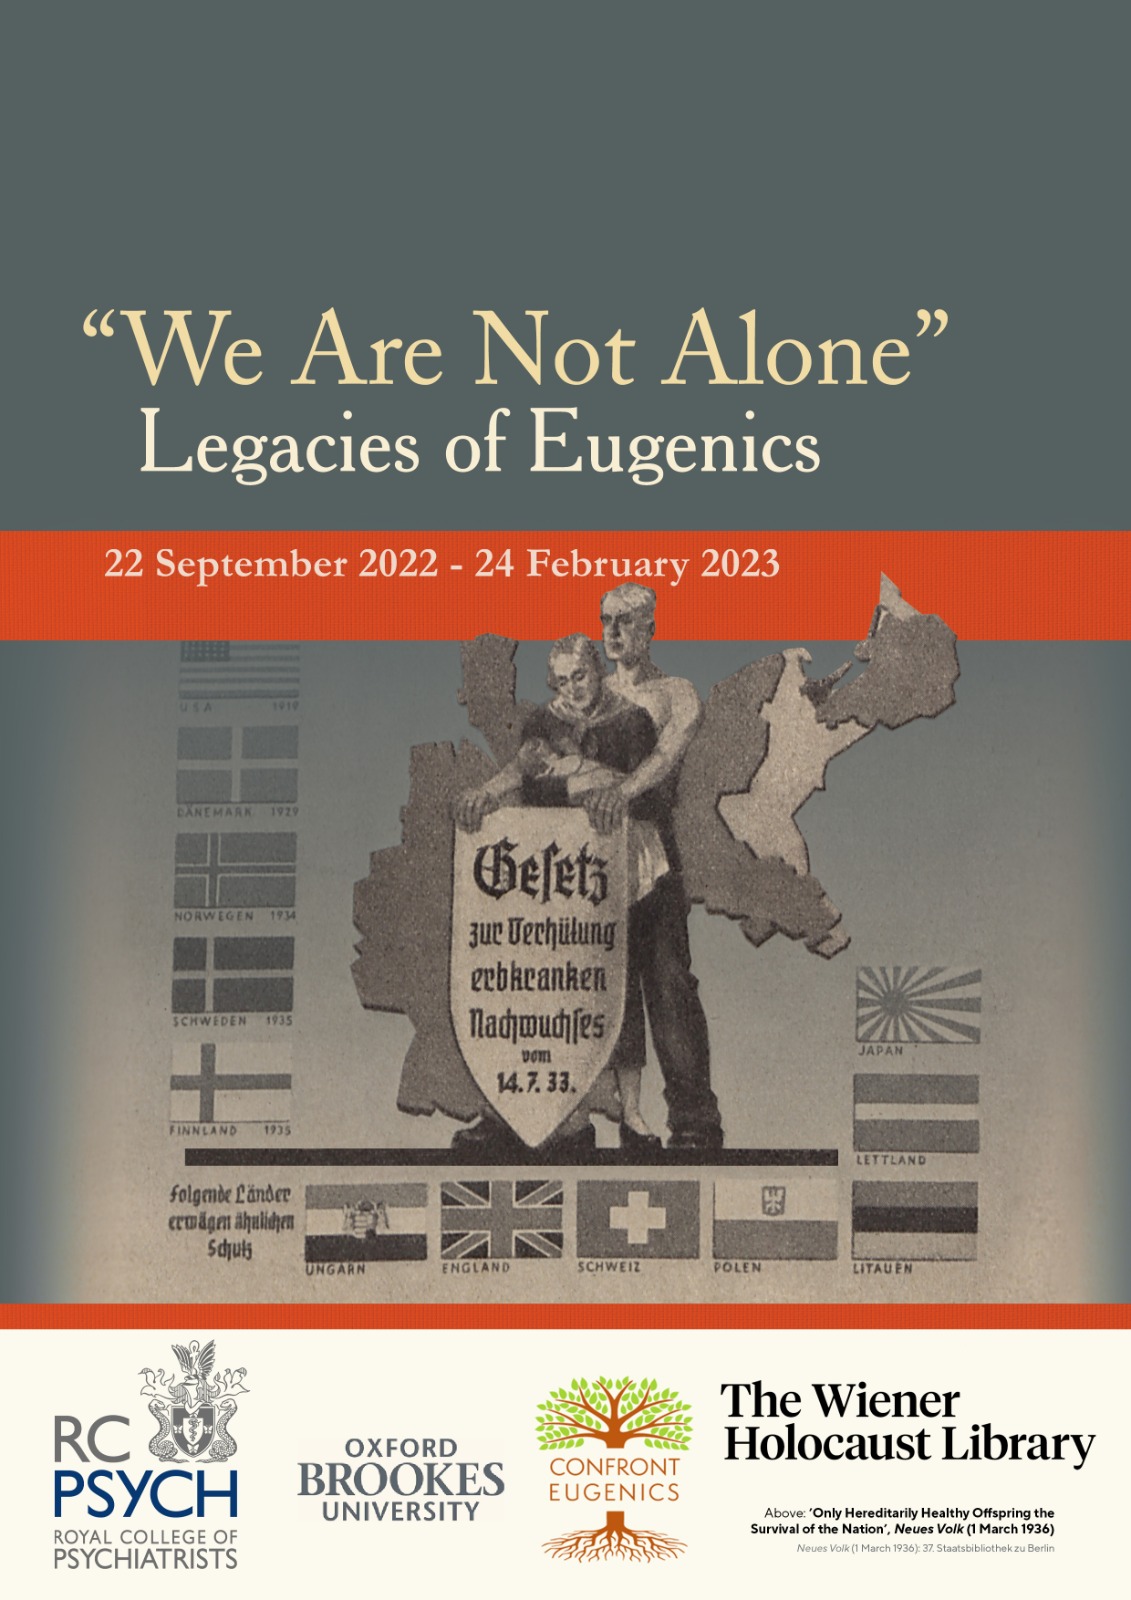 We are not alone Legacies of Eugenics exhibition flyer